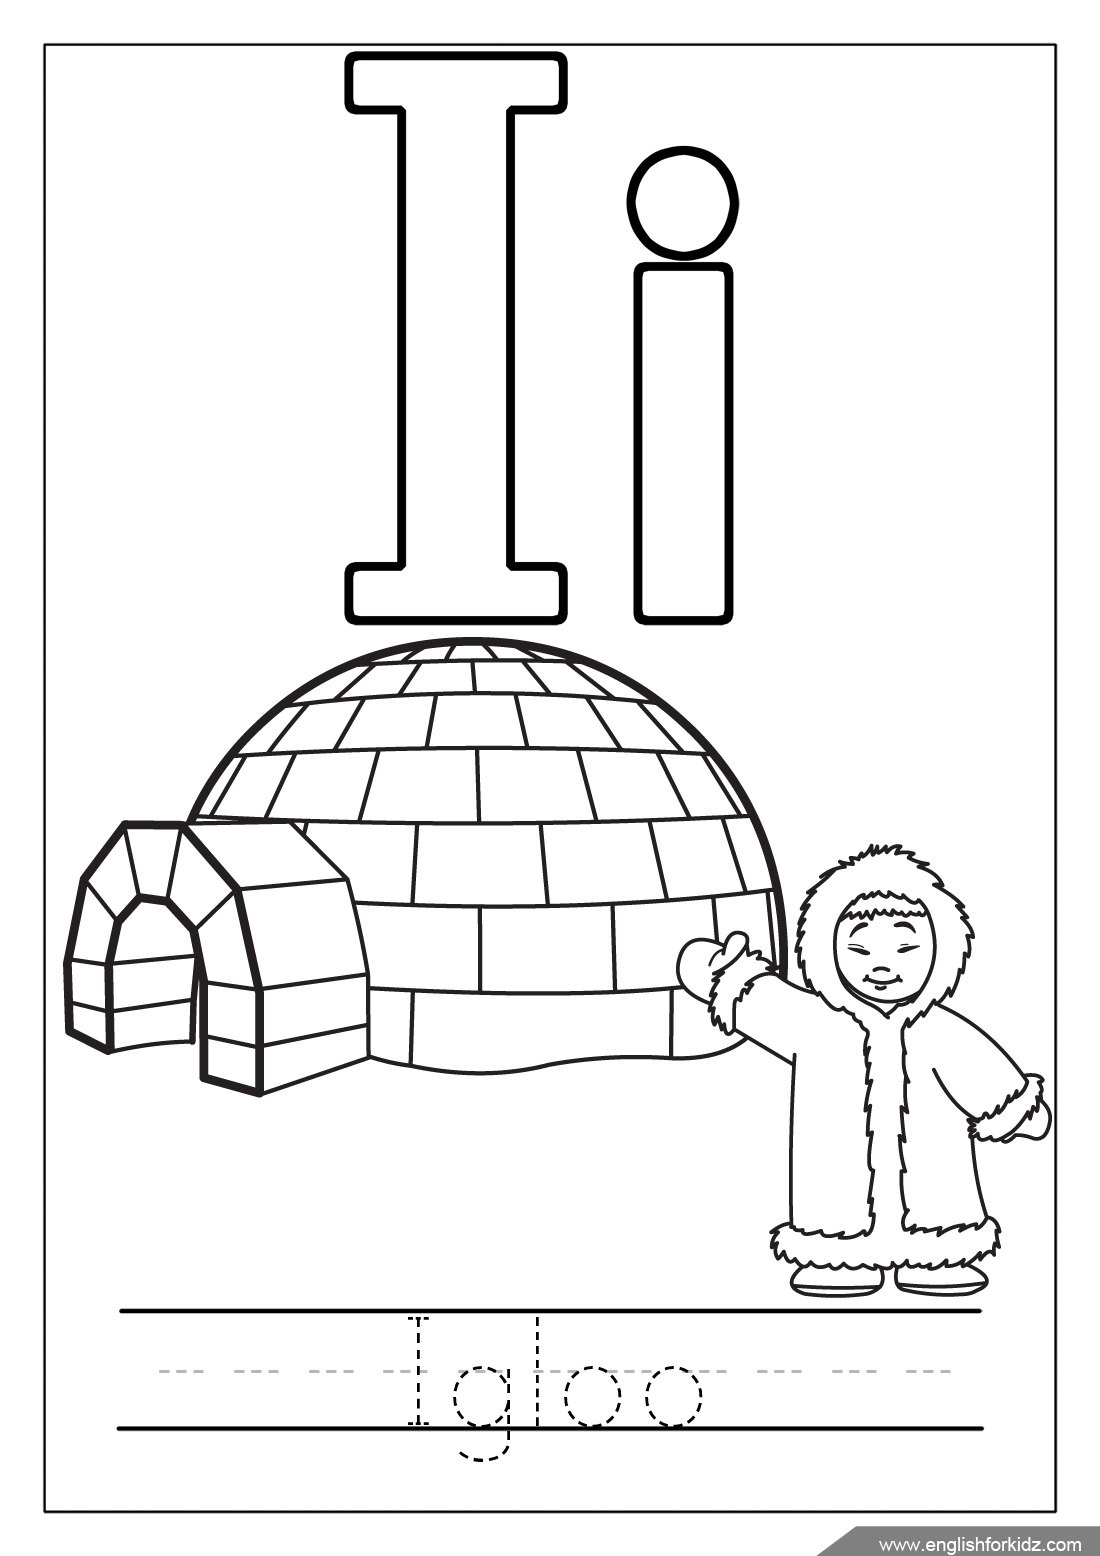 Download Coloring Pages Igloo - 189+ SVG File for Silhouette for Cricut, Silhouette and Other Machine